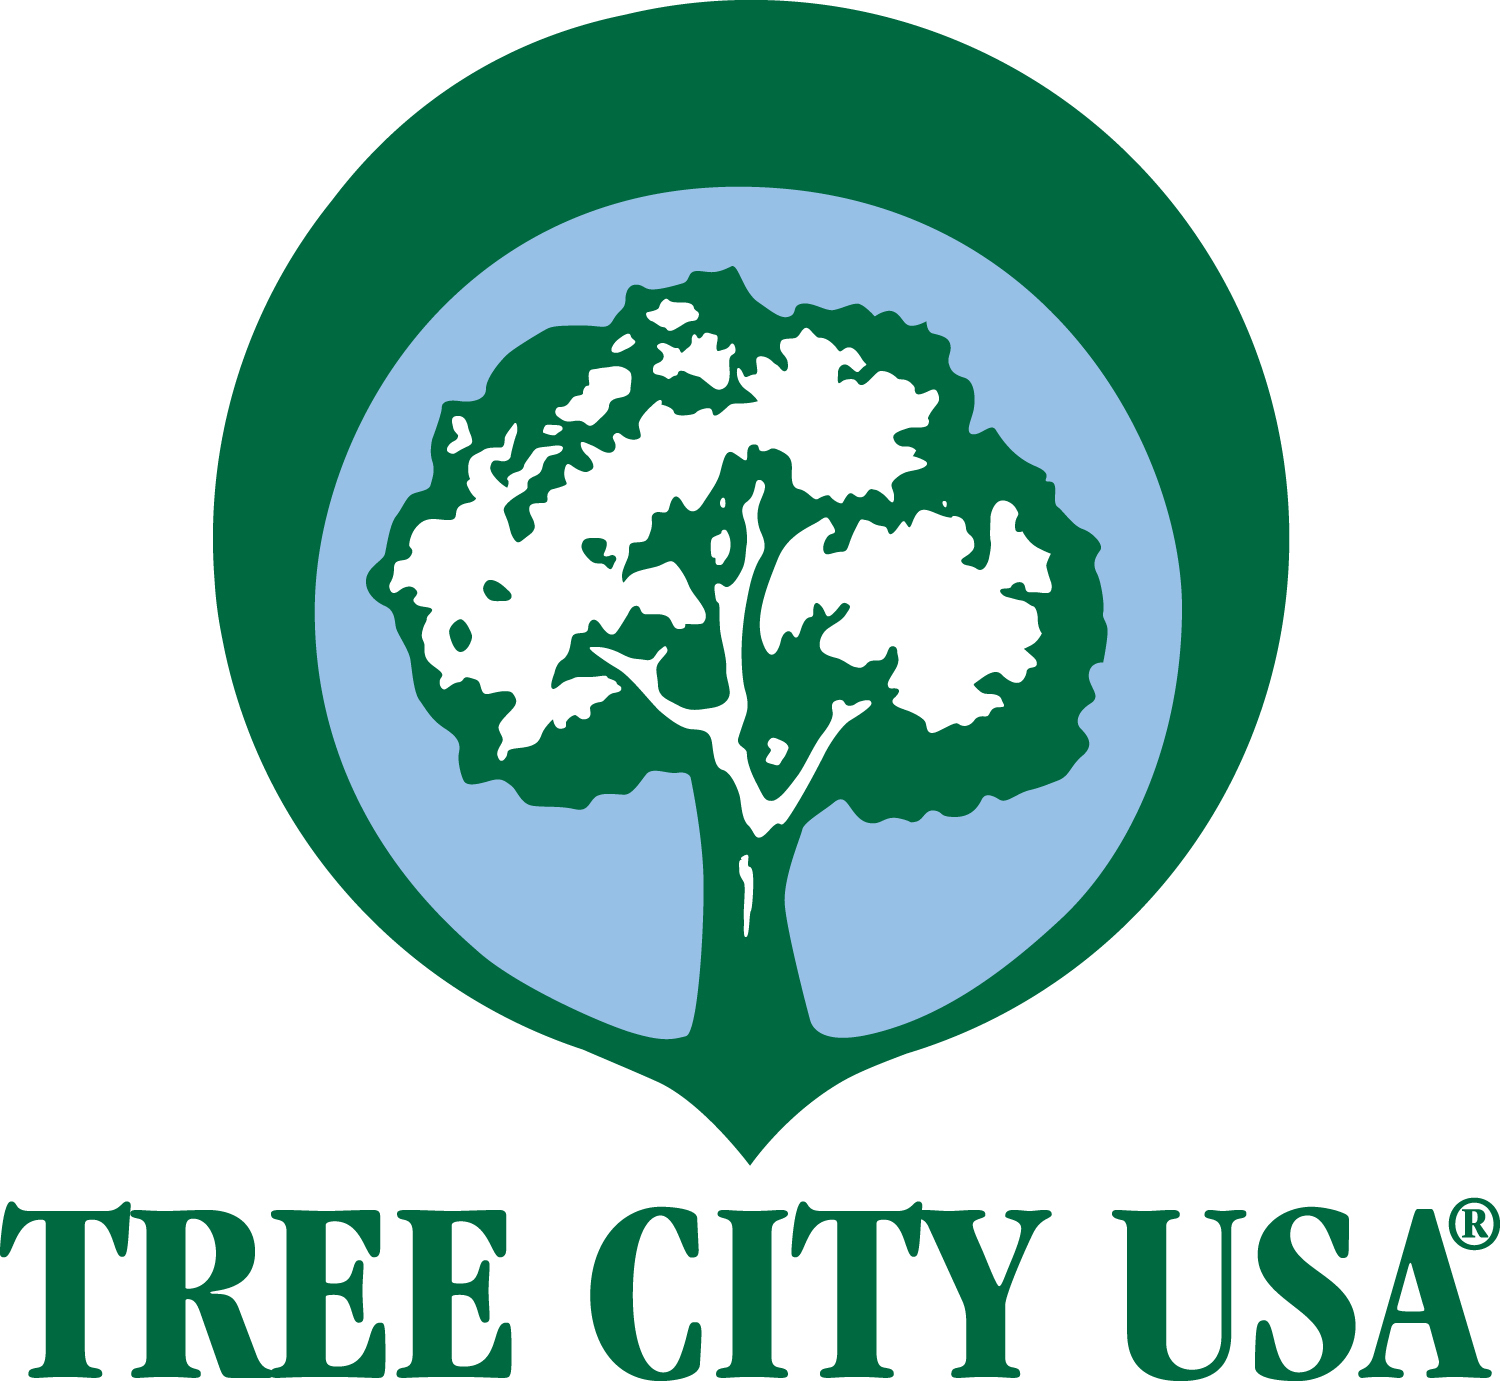 Click here to go to the Tree City USA page of the Arbor Day website.